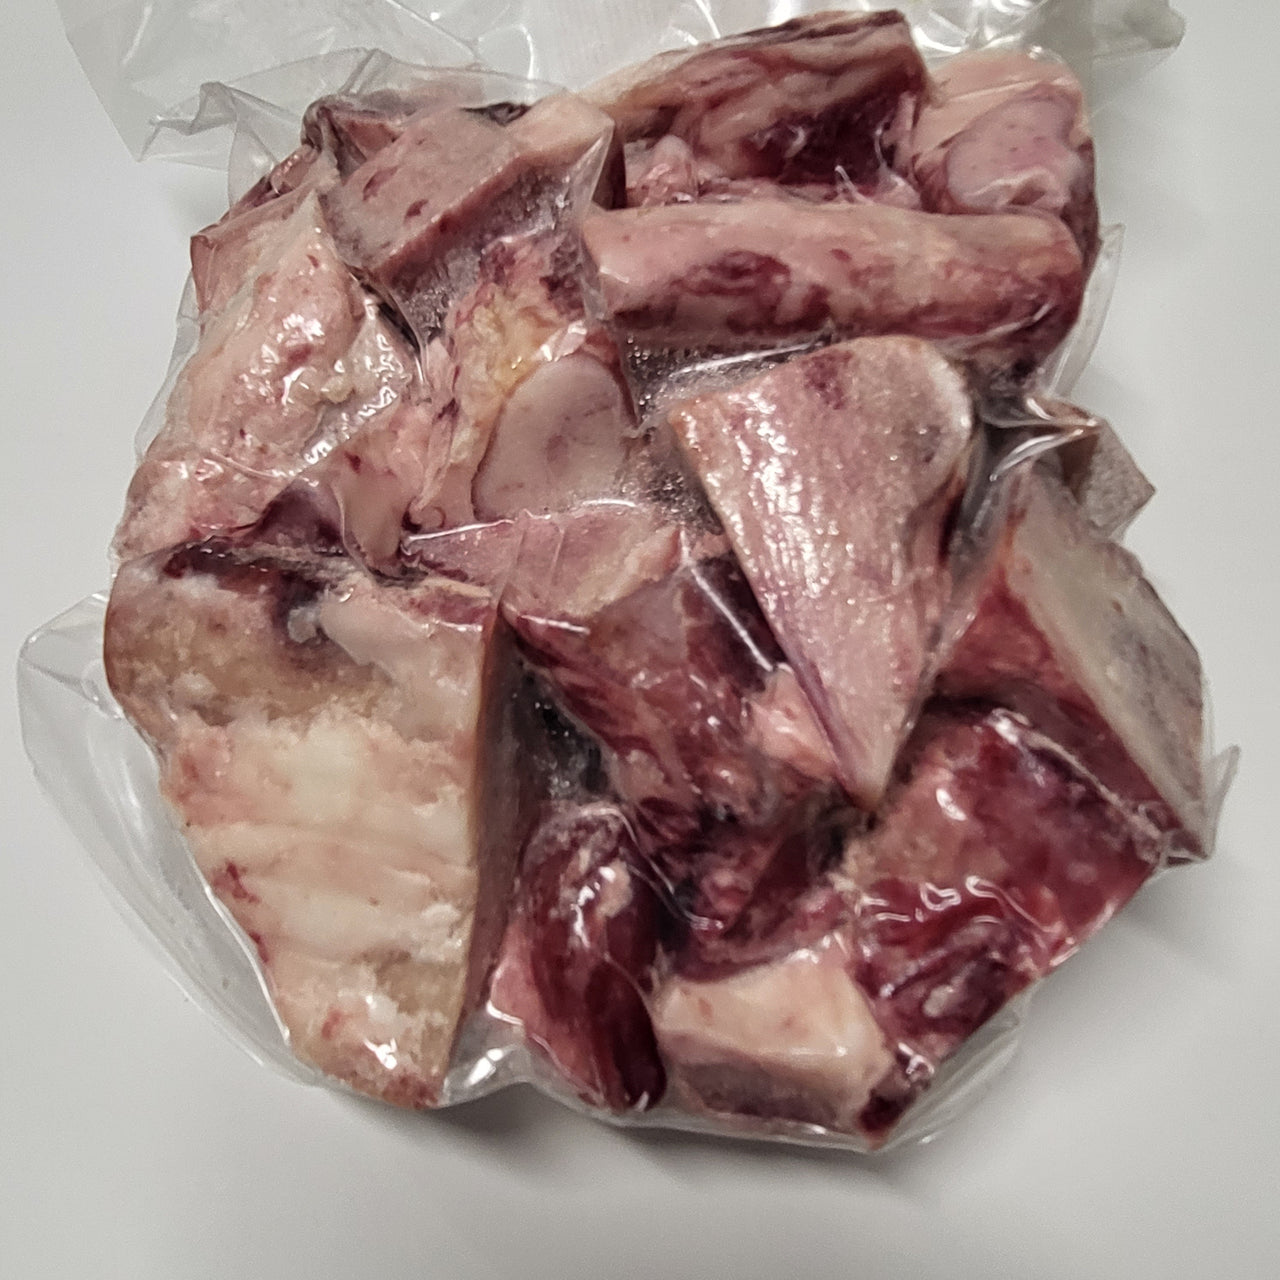 Grassfed Beef Bones/ Mix of Marrow and Knuckle Bones, Cross Cut Style Japanese Black Wagyu Beef Full Blood AGED 21+ Days